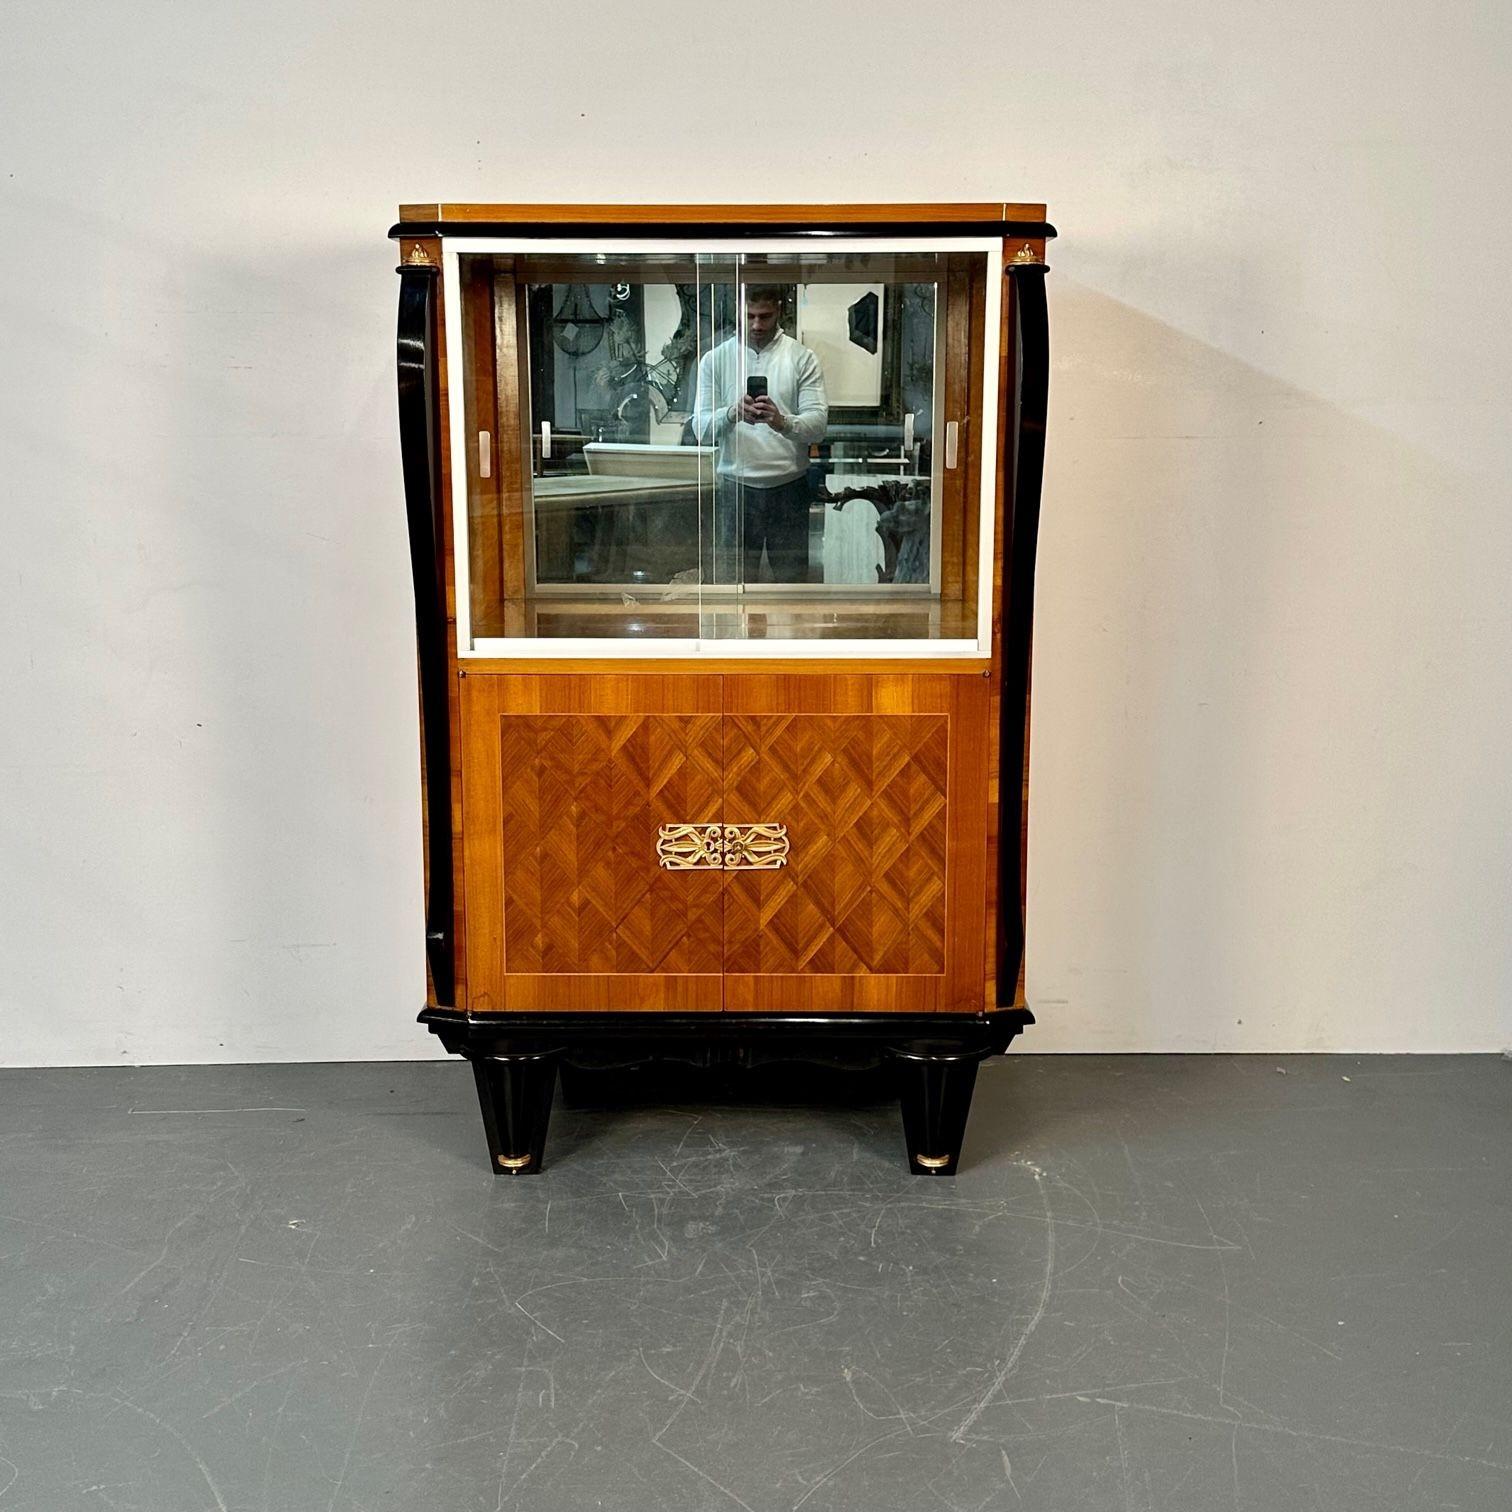 French Art Deco Marquetry vitrine / cabinet, buffet, rosewood, walnut, polished
A magnificently refinished ebony and rosewood walnut inlaid vitrine, bookcase or showcase cabinet. The parquetry and bonze mounted front having two doors hiding a group